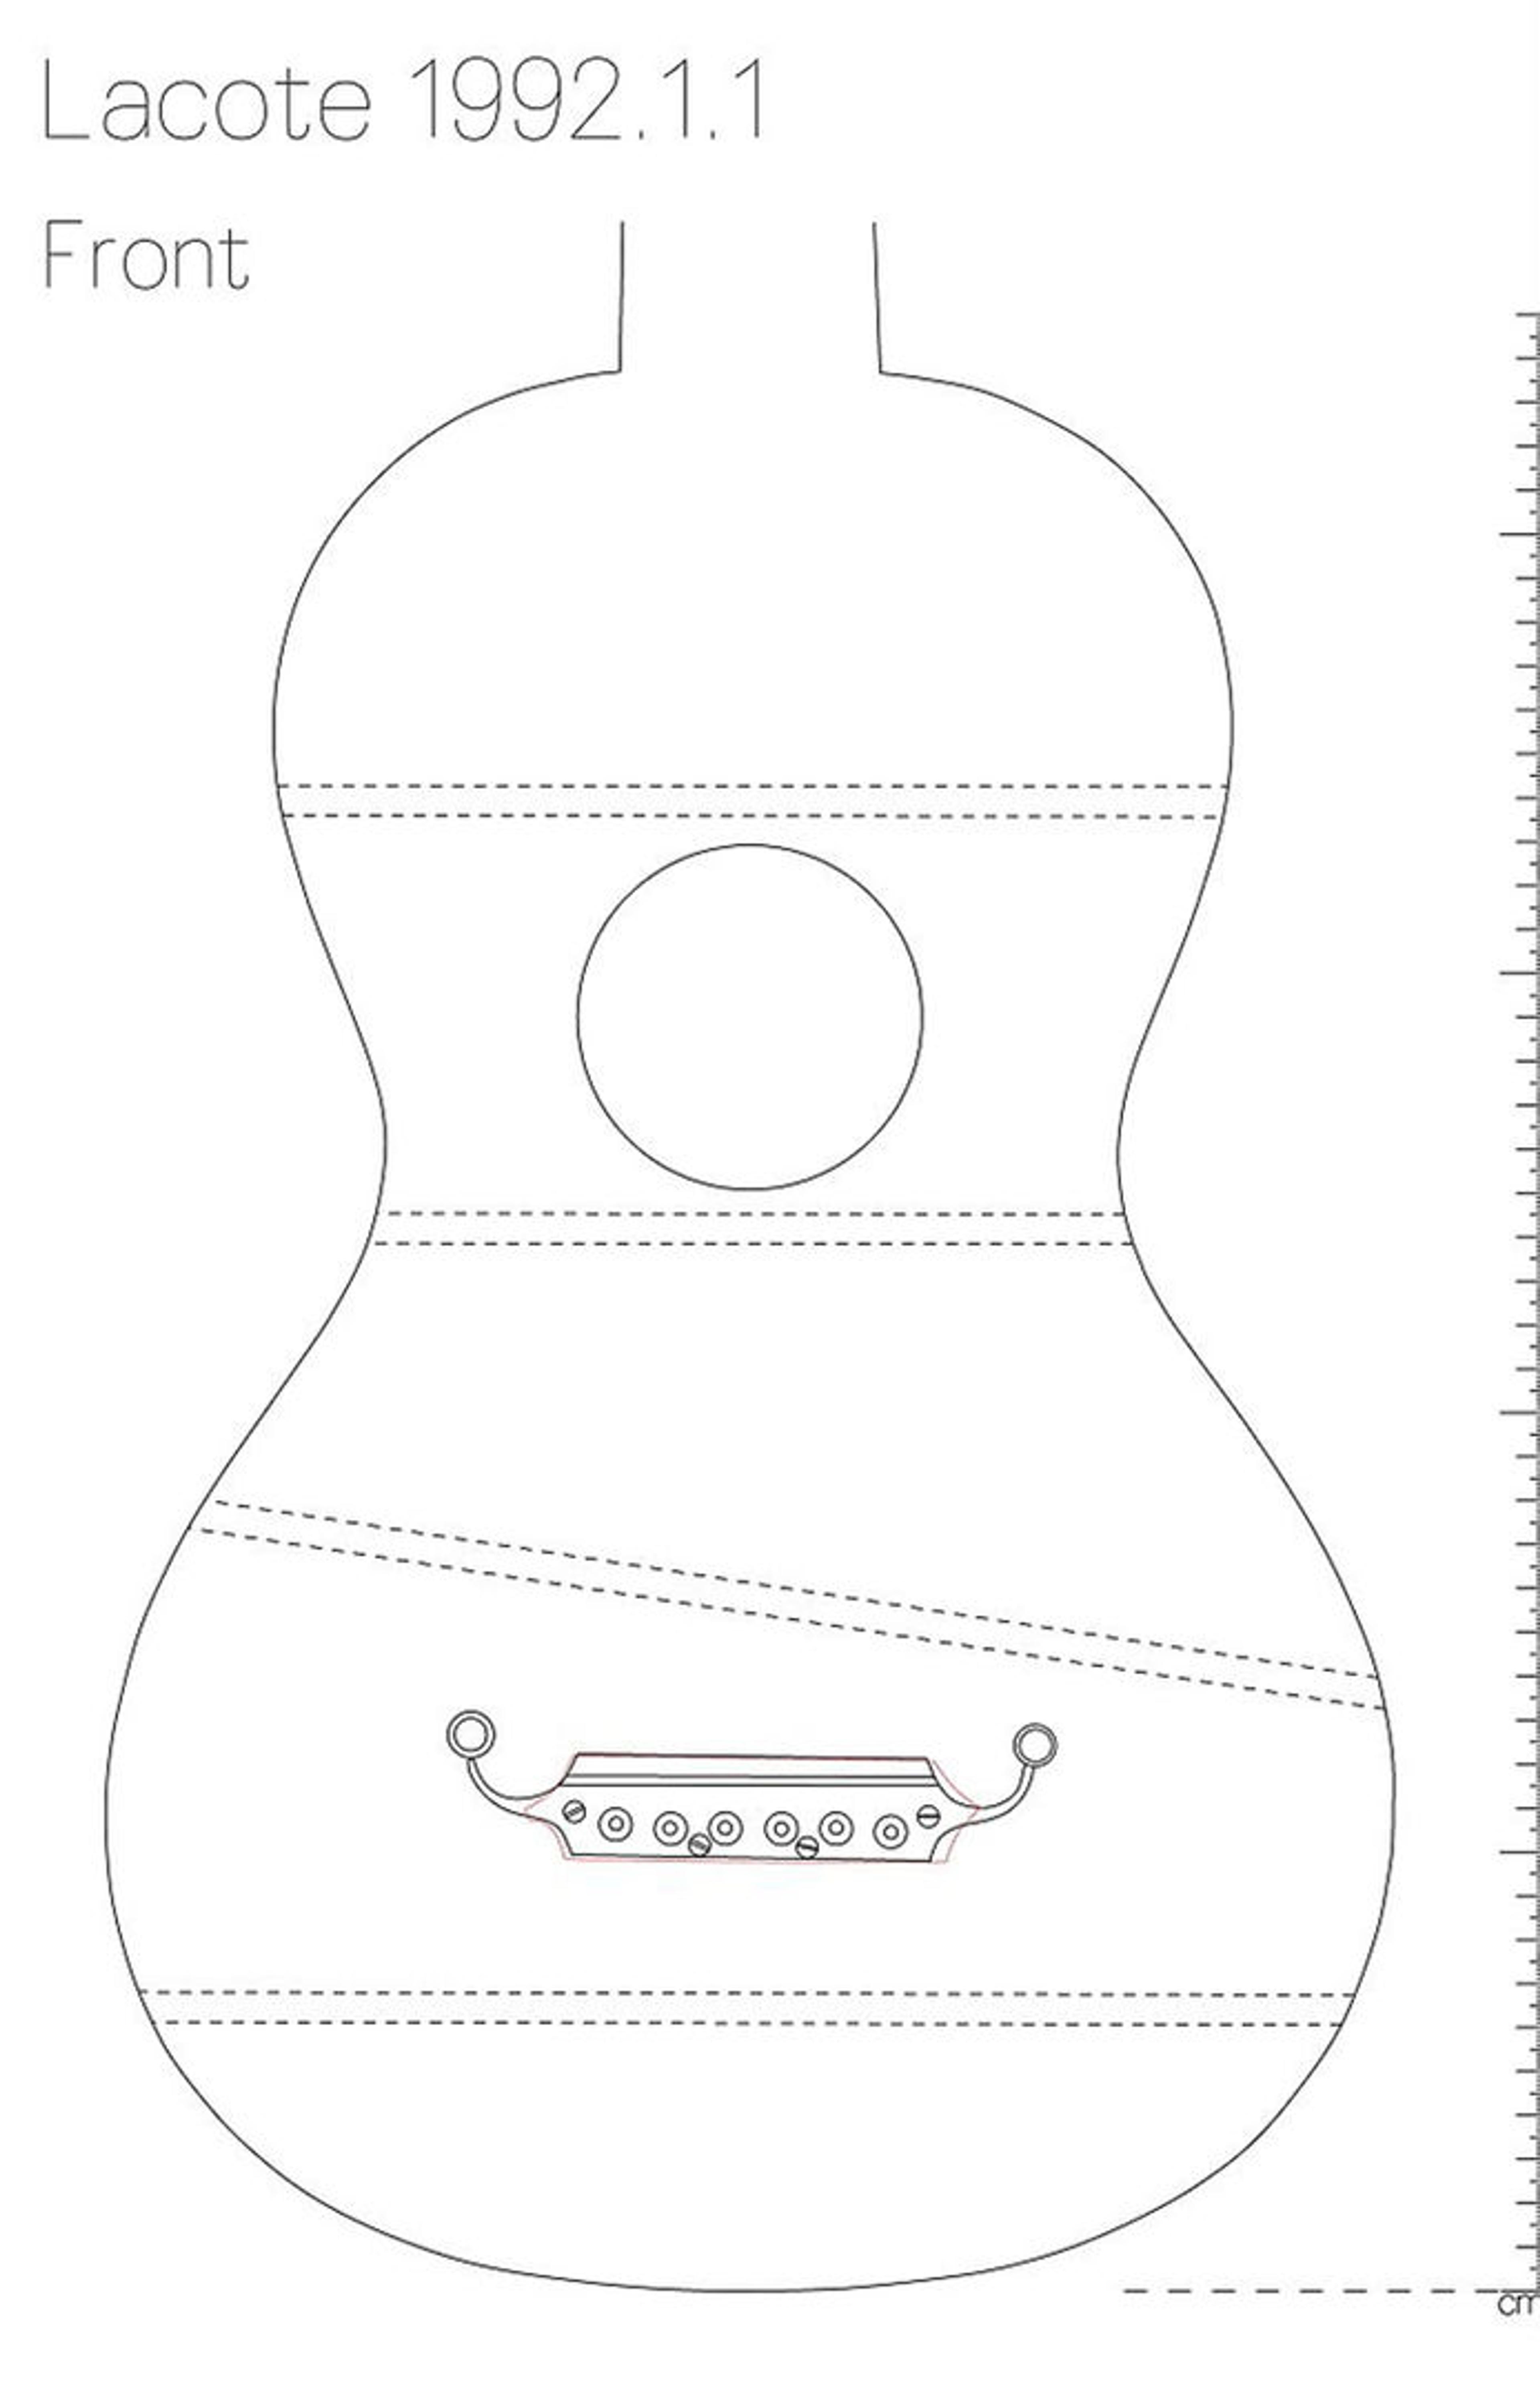 Drawing of The Met's Lacôte guitar showing proportion and size.